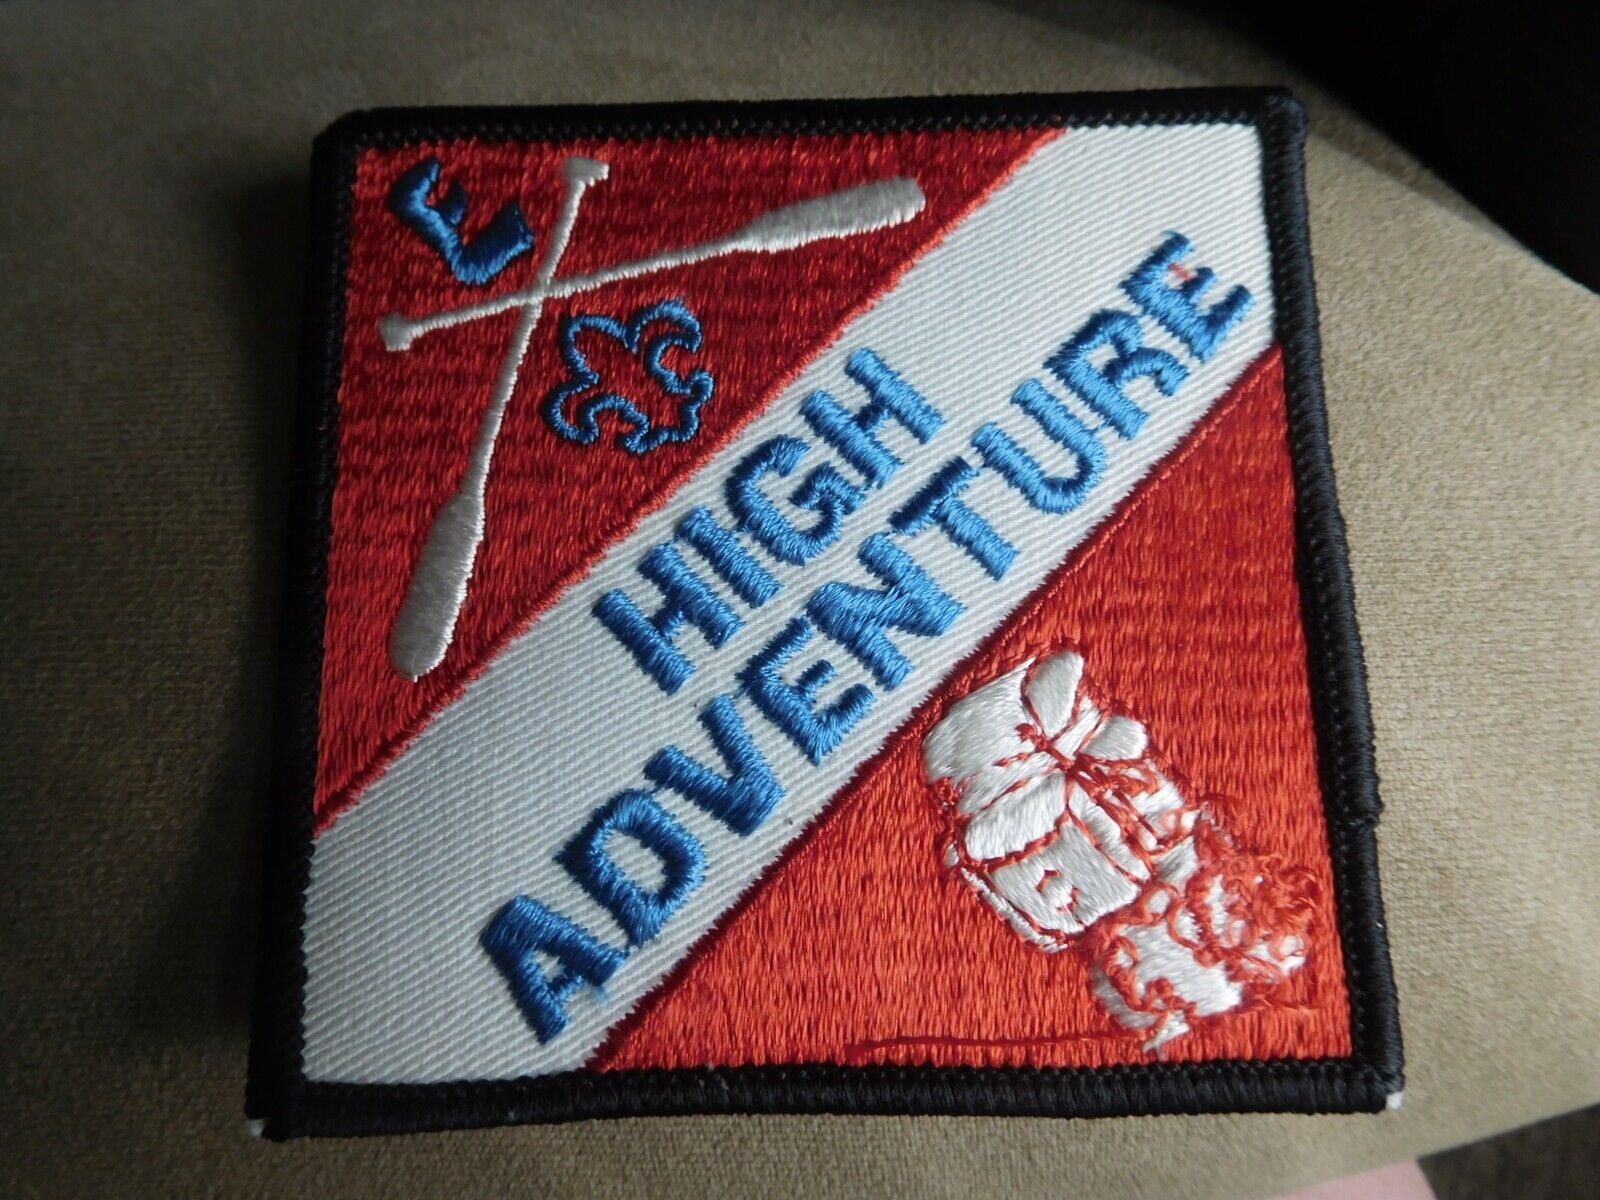 DQ SCOUT BSA EXPLORING HIGH ADVENTURE LARGE DIAMOND PATCH AWARD INSIGNIA BADGE 